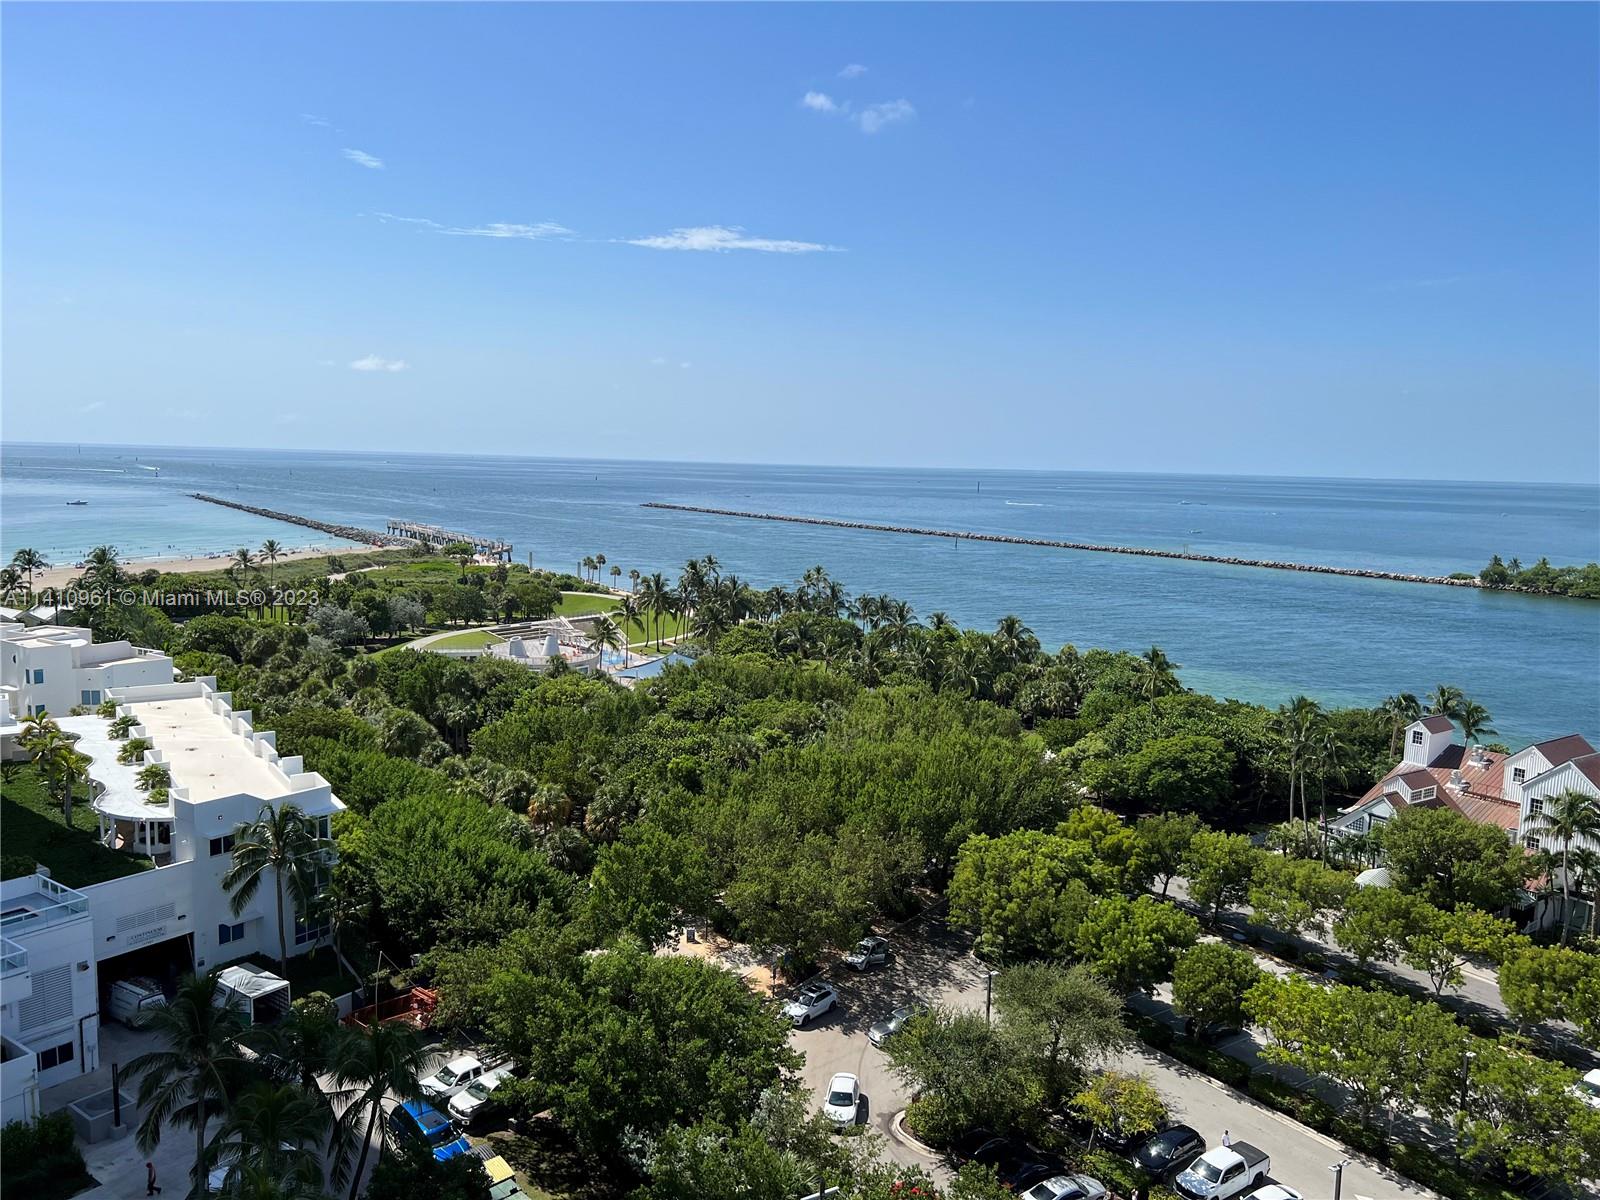 Completely remodeled southeast corner residence with stunning Atlantic Ocean & Government Cut views from the largest floor plan at South Pointe Tower. Enjoy stunning sunrises & ships sailing through the intracoastal from every room & from a large wrap around terrace. Brand new impact windows & sliding doors just installed. Residence features an open kitchen, master suite with direct views of the ocean & intracoastal, a spacious walk in closet & sumptuous master bath. Both guest bedrooms have beautiful ocean views and access to a private terrace. A true 3 bedroom gem in the heart of the renowned South of fifth neighborhood, steps to the ocean, marina, parks, high-end restaurants and much more. Recently updated amenities include a brand new gym, pool, tennis courts, great lawn & dog parks.